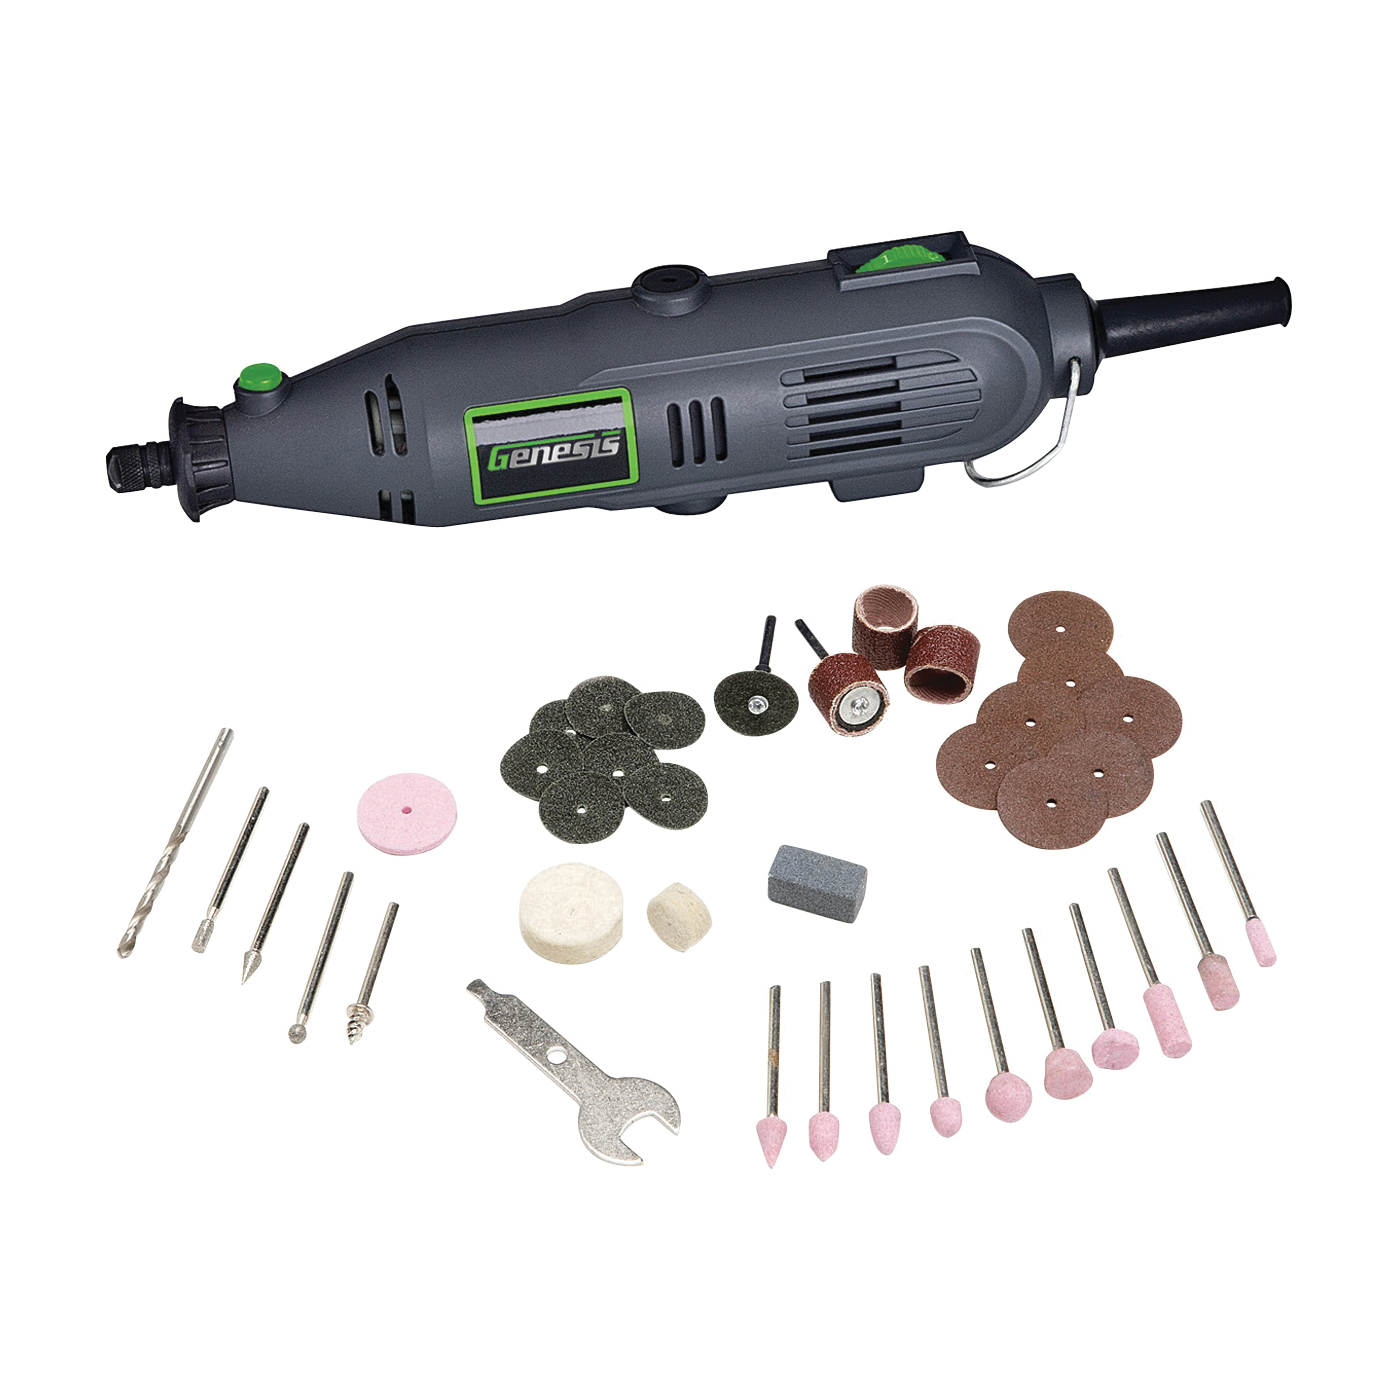 GRT2103-40 Rotary Tool, 1 A, 1/8 in Chuck, Keyless Chuck, 8000 to 30,000 rpm Speed